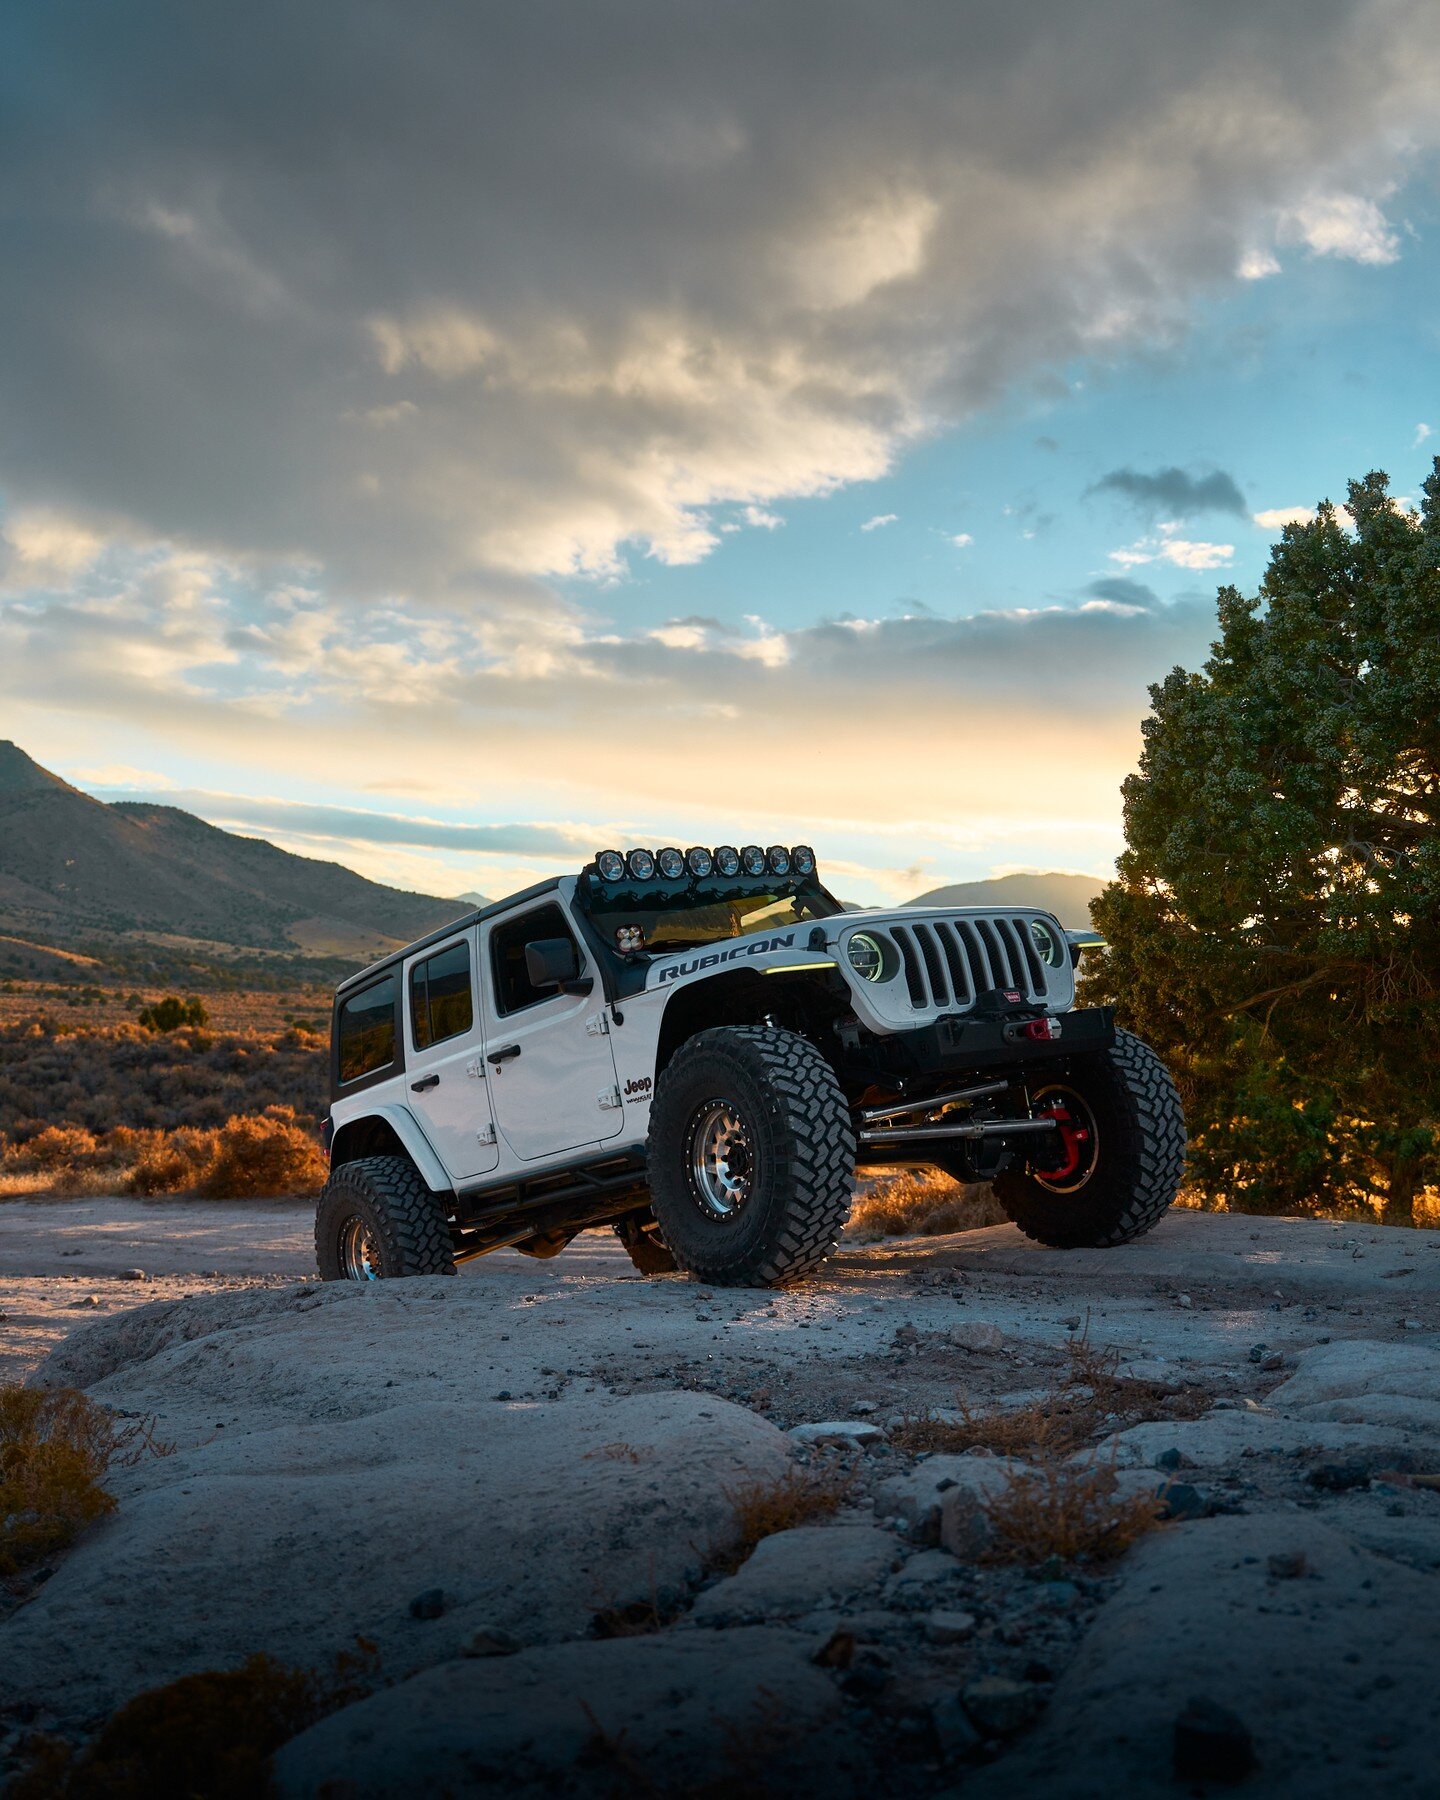 New HotKarl content, who dis?

The Jeep is all back together with all it's new bits and it's real nice. EJS 2022 was the last time we did any real rock crawling stuff in the Jeep. We broke/bent/cracked a bunch of stuff and since then it's been limpin